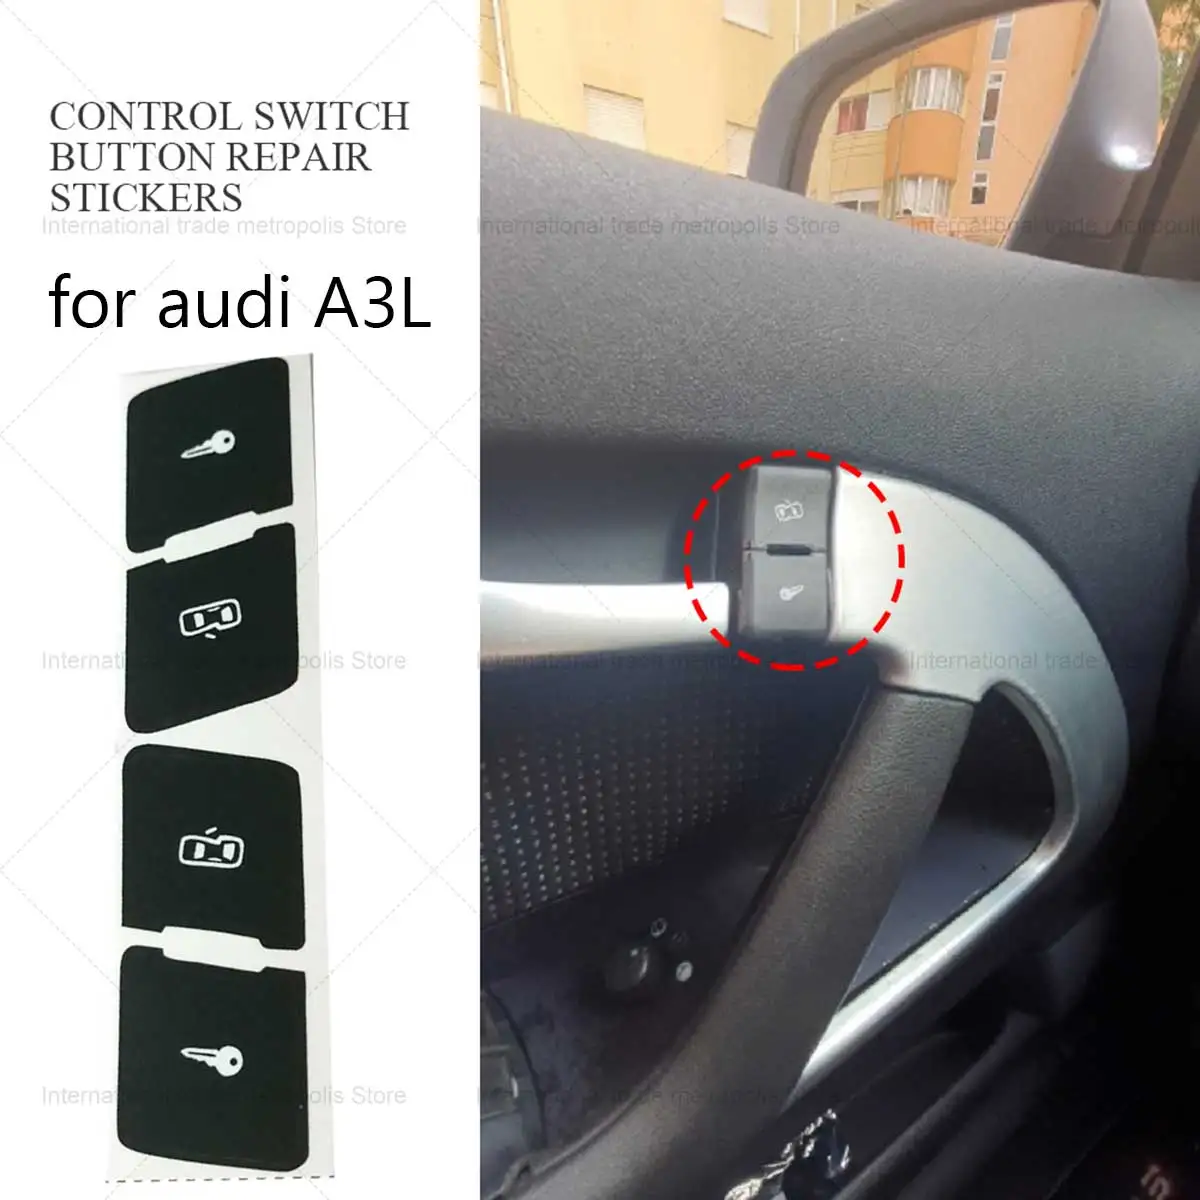 

Left+Right Matte Black Car Door Lock Control Switch Button Repair Stickers Decals For Audi A3L Fixed Button Car Stickers New